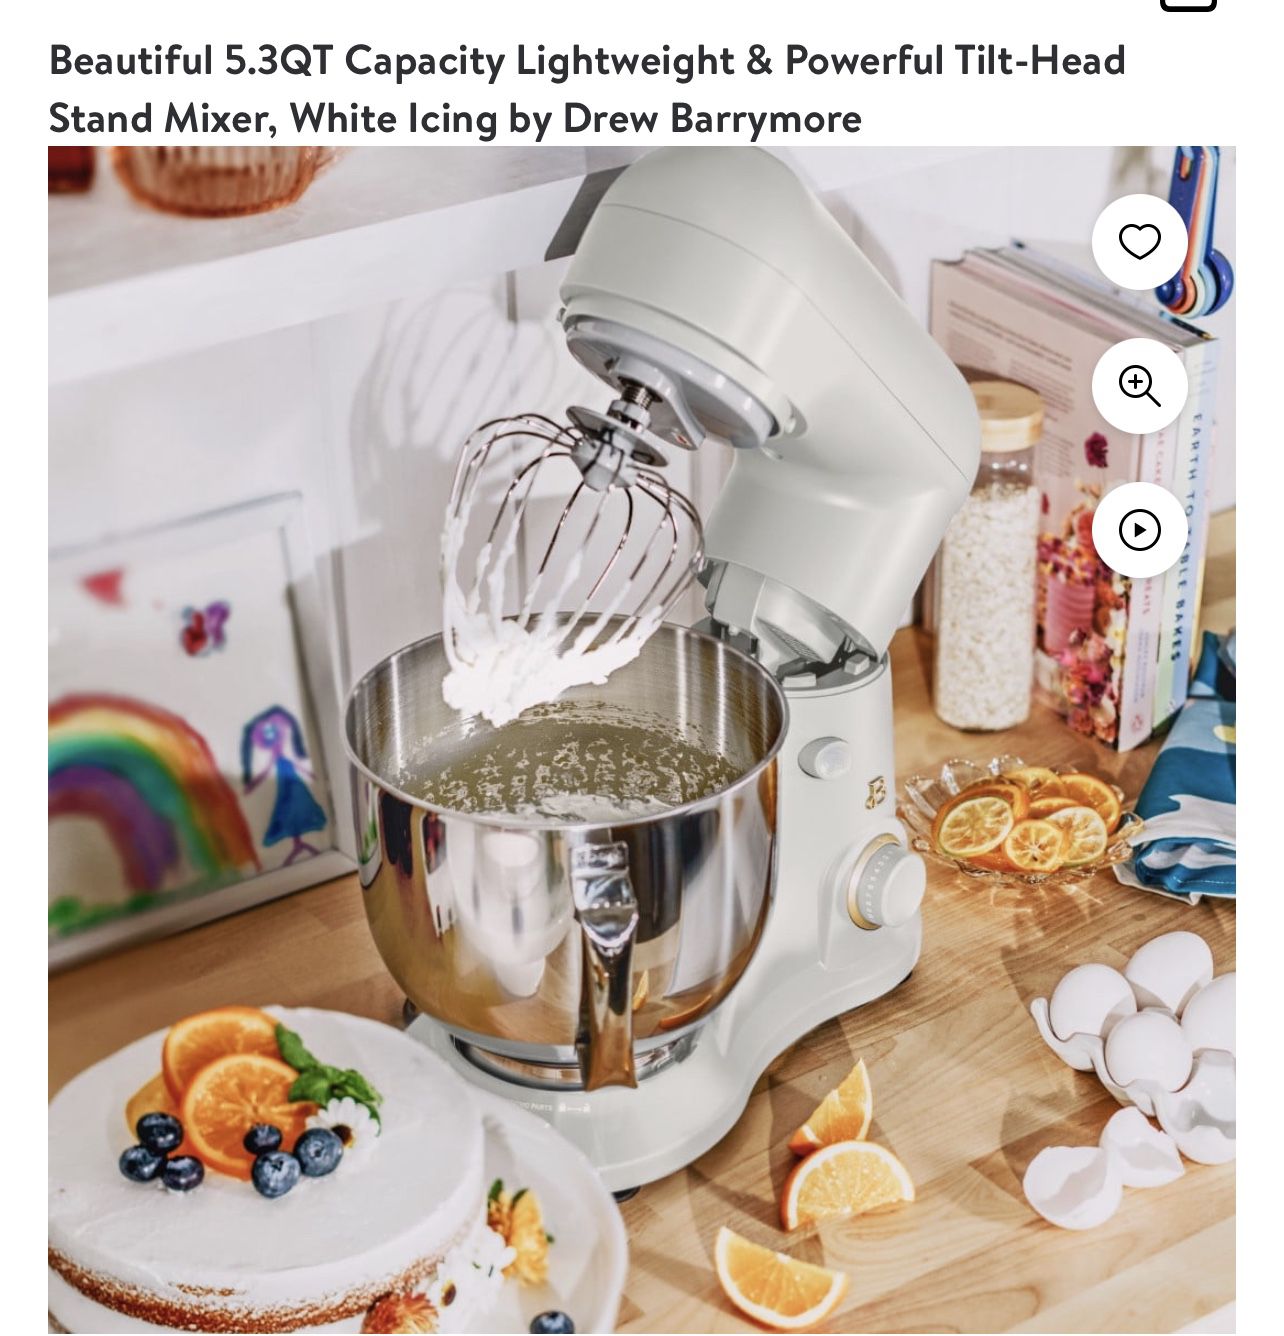 Breville Stand Mixer, Like New for Sale in Miami, FL - OfferUp